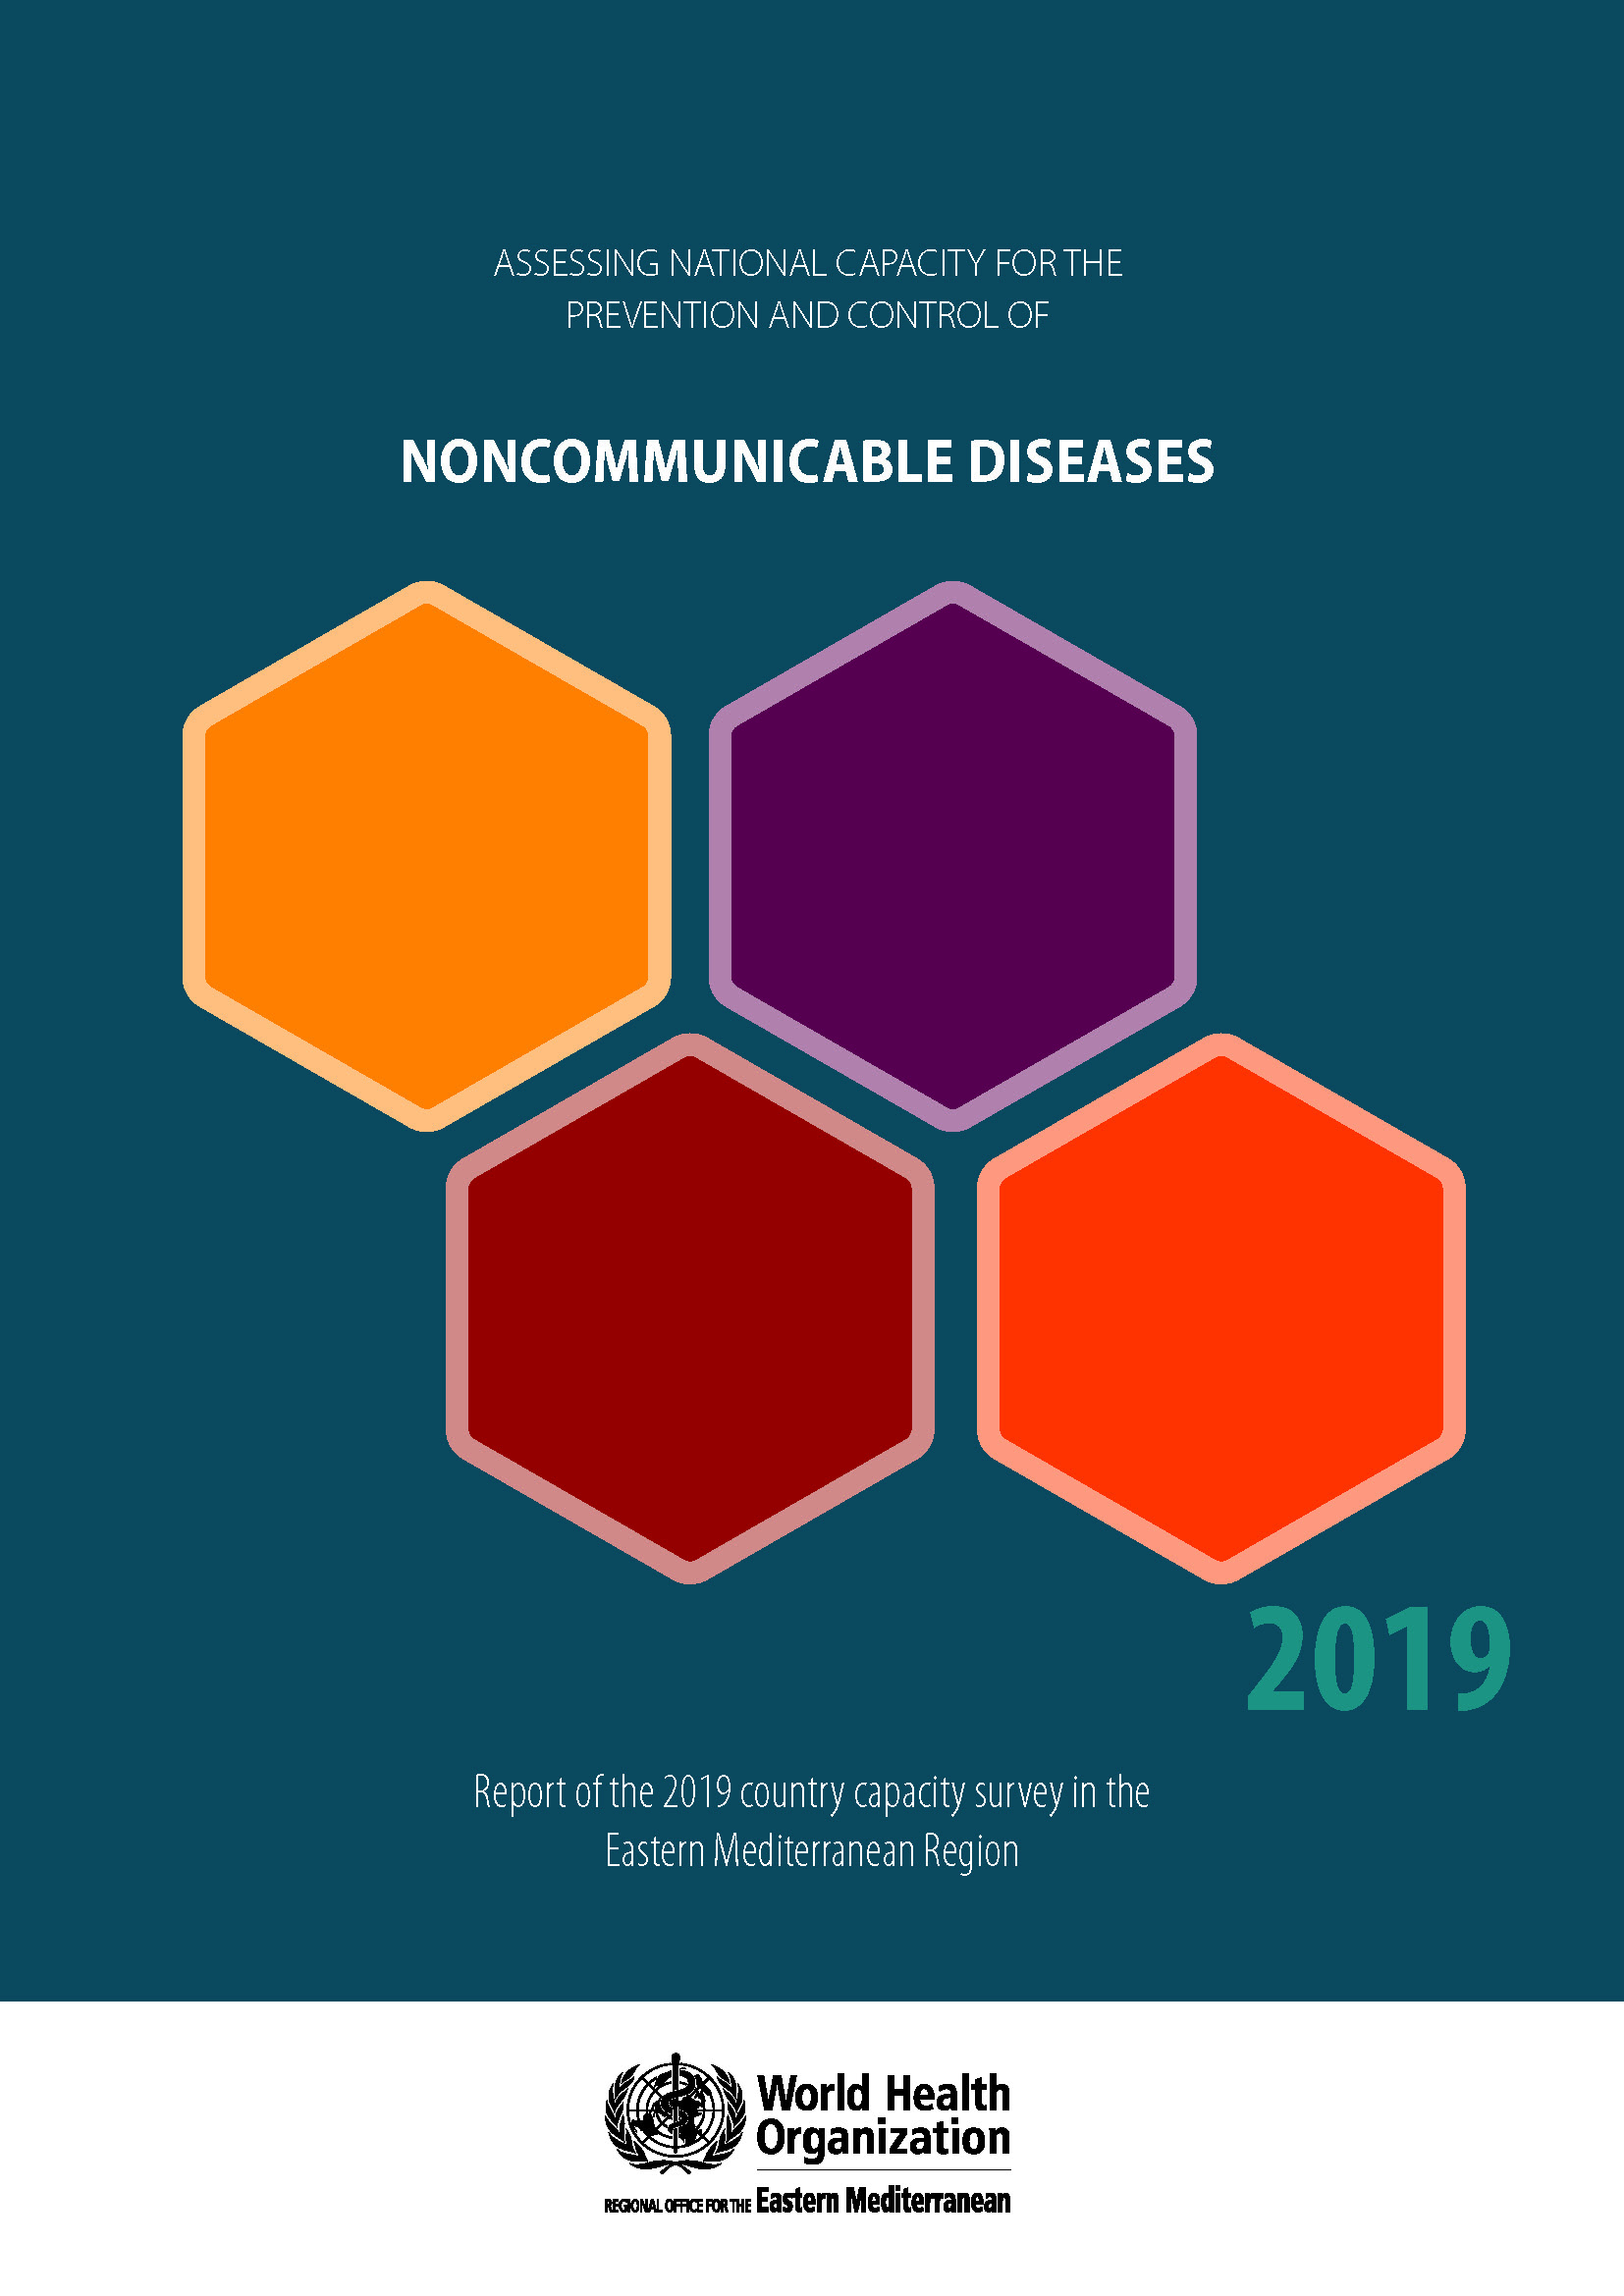 Assessing national capacity for the prevention and control of noncommunicable diseases: report of the 2019 country capacity survey in the Eastern Mediterranean Region